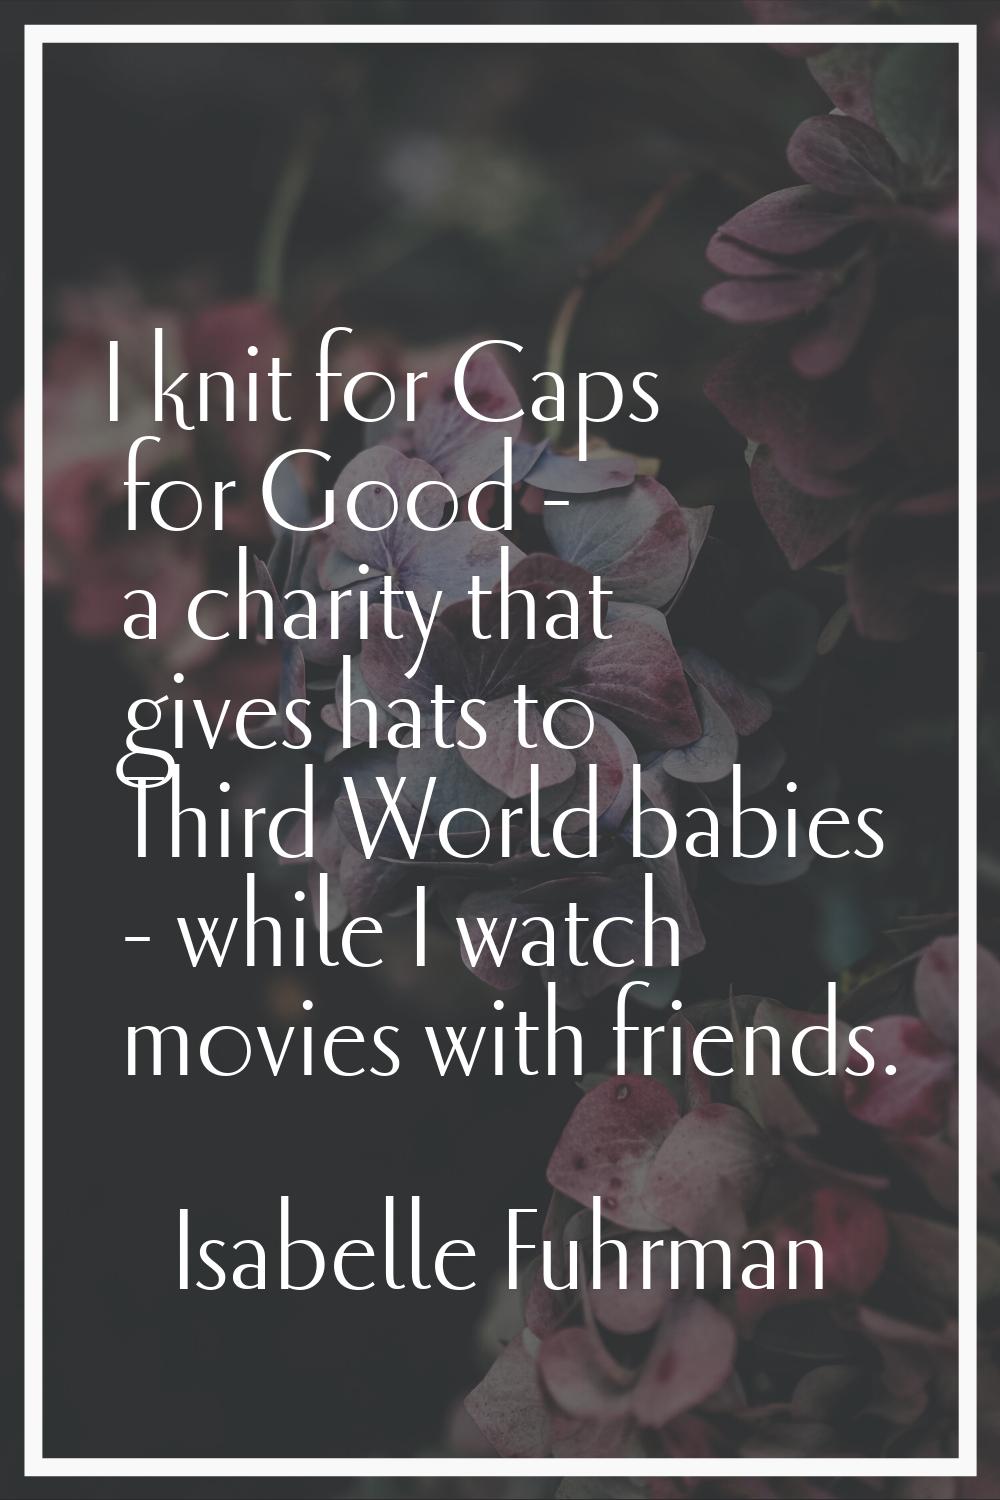 I knit for Caps for Good - a charity that gives hats to Third World babies - while I watch movies w